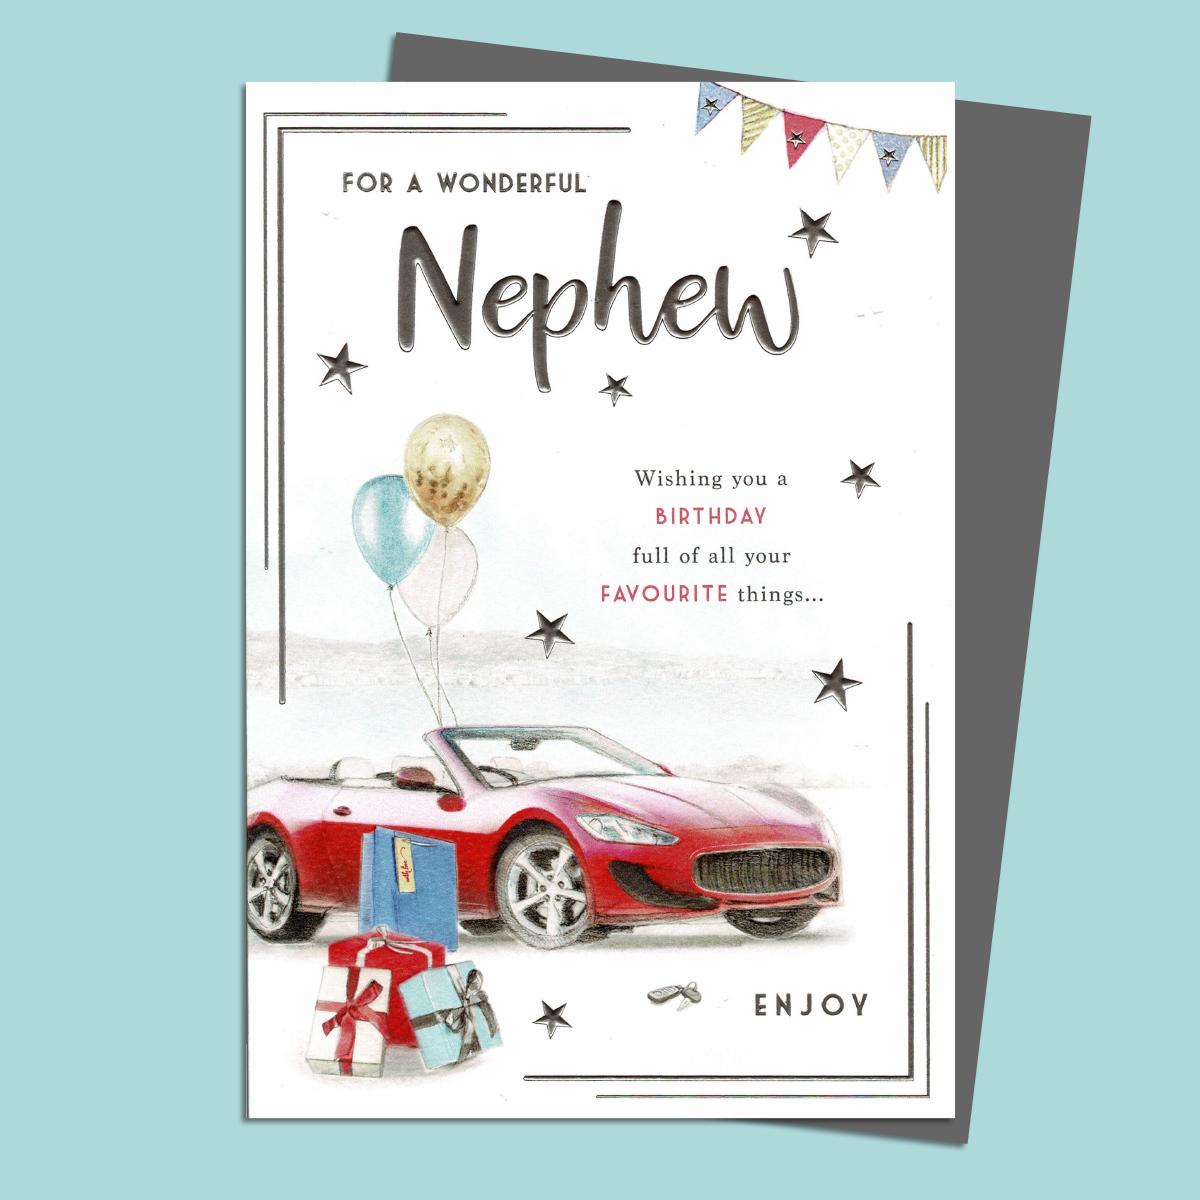 Nephew Birthday Card Featuring A Red Sports Car With Balloons Attached